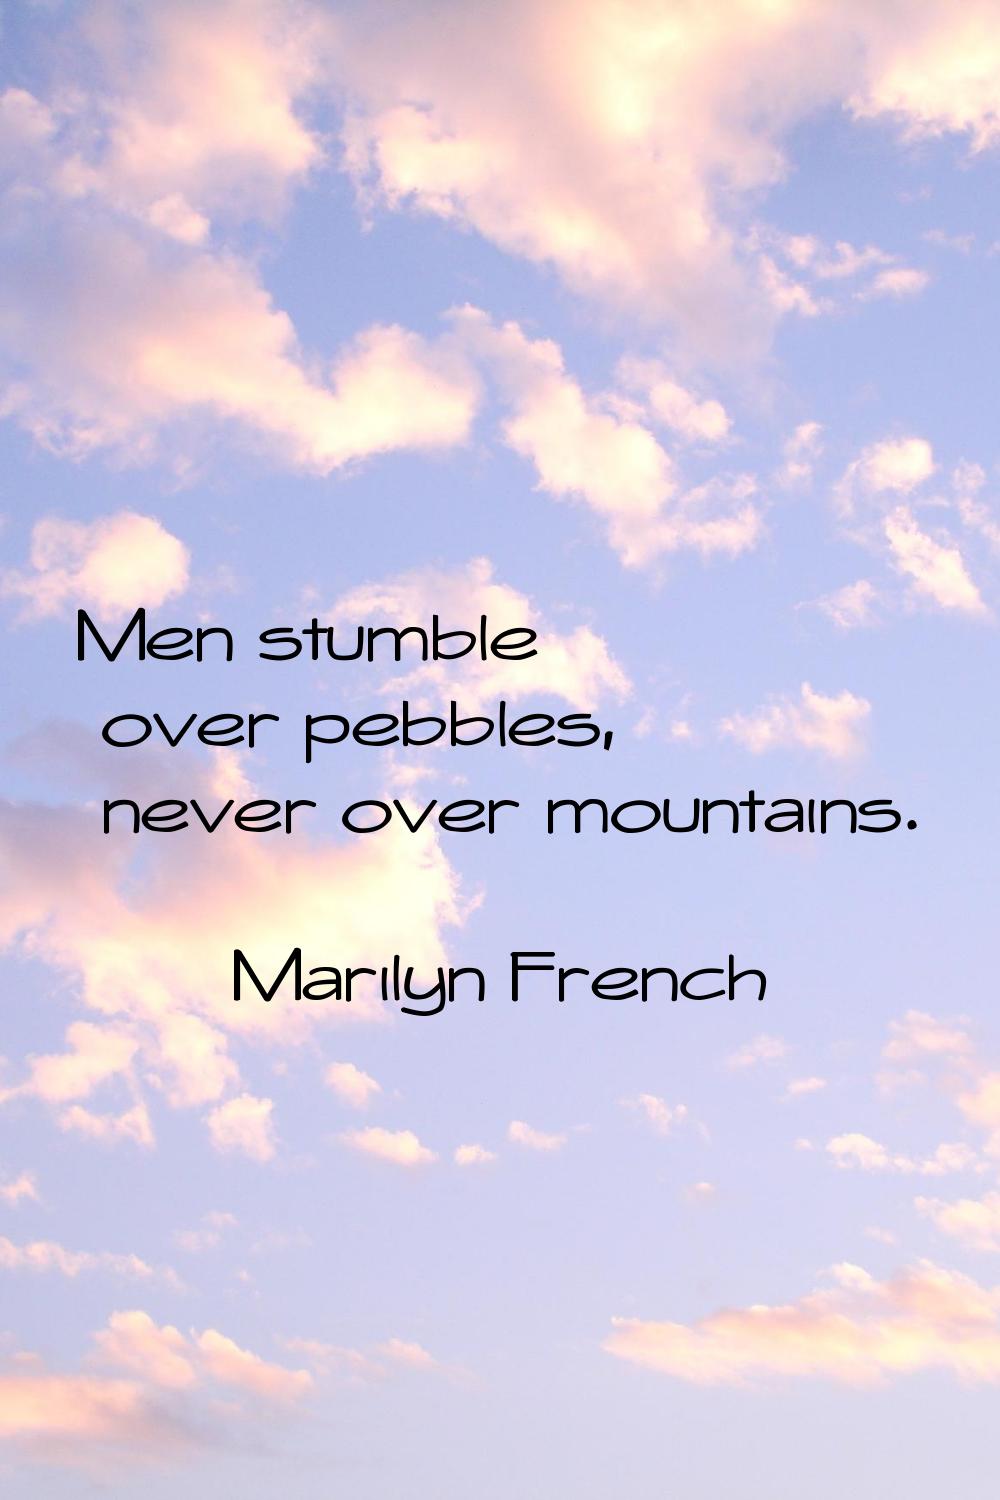 Men stumble over pebbles, never over mountains.